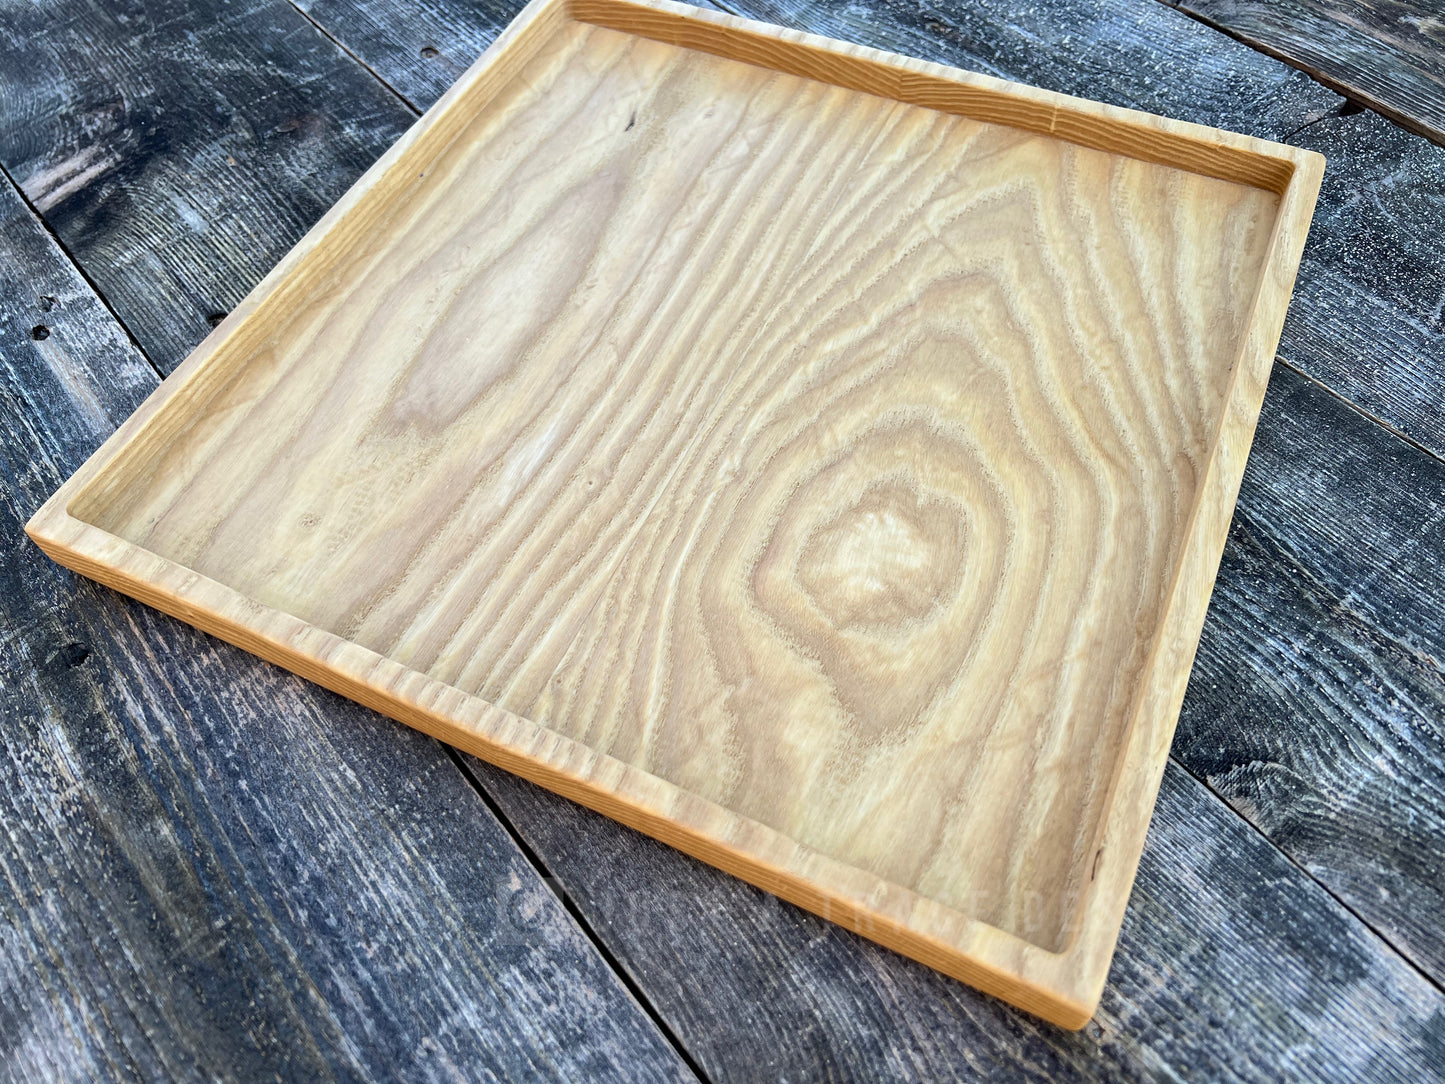 12" Square Ash Hardwood Tray, Grazing Board, Charcuterie Board, Coffee Table, Ottoman Tray, Wood Platter, Serving Tray, Wood Dish, Handmade Gift